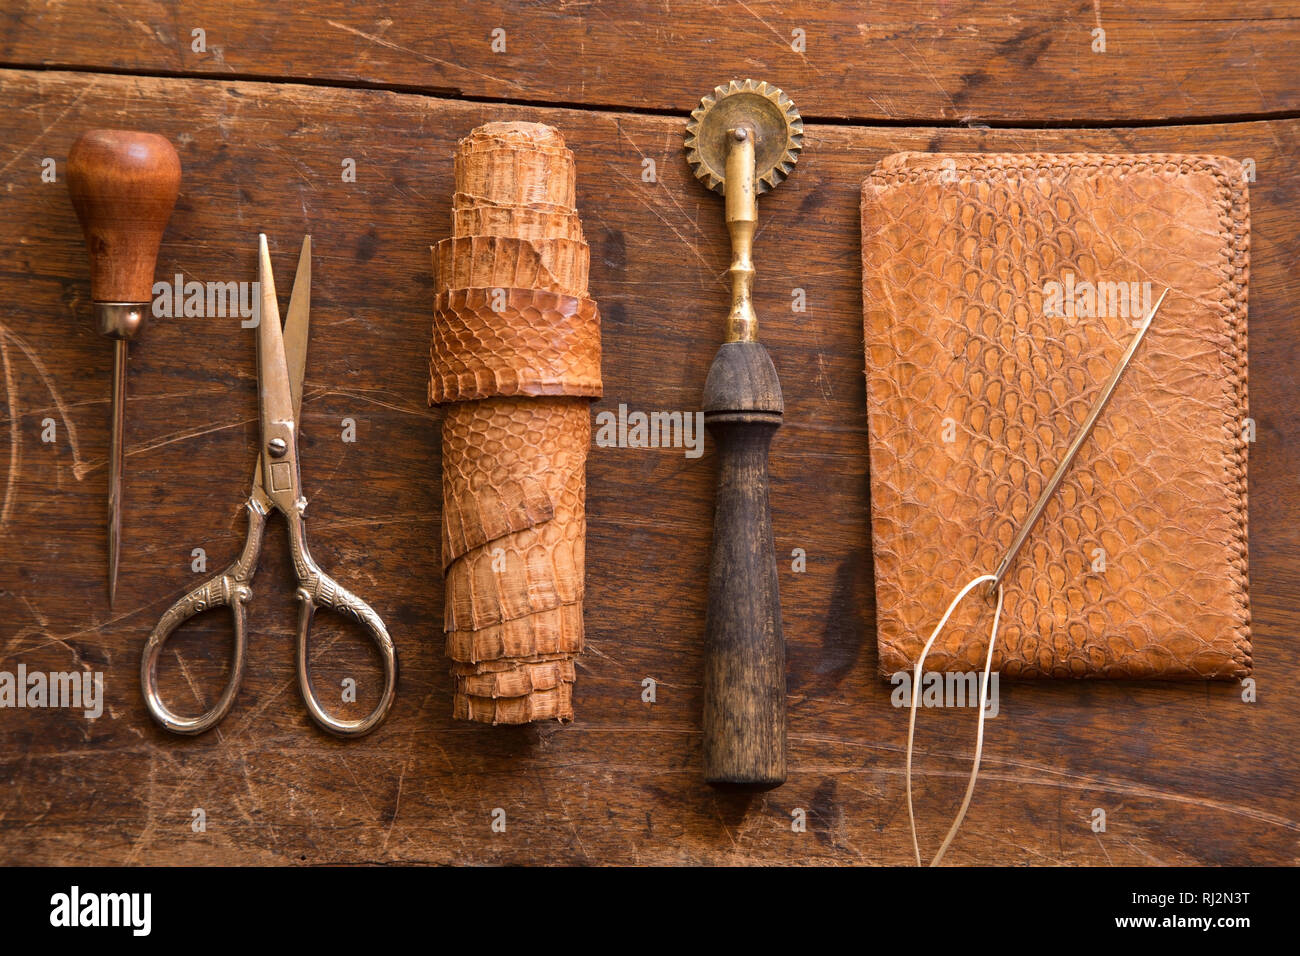 Leather Craft Accessories. Tools And Matherials On Dark Wooden Table  Background Top View. Stock Photo, Picture and Royalty Free Image. Image  83962191.